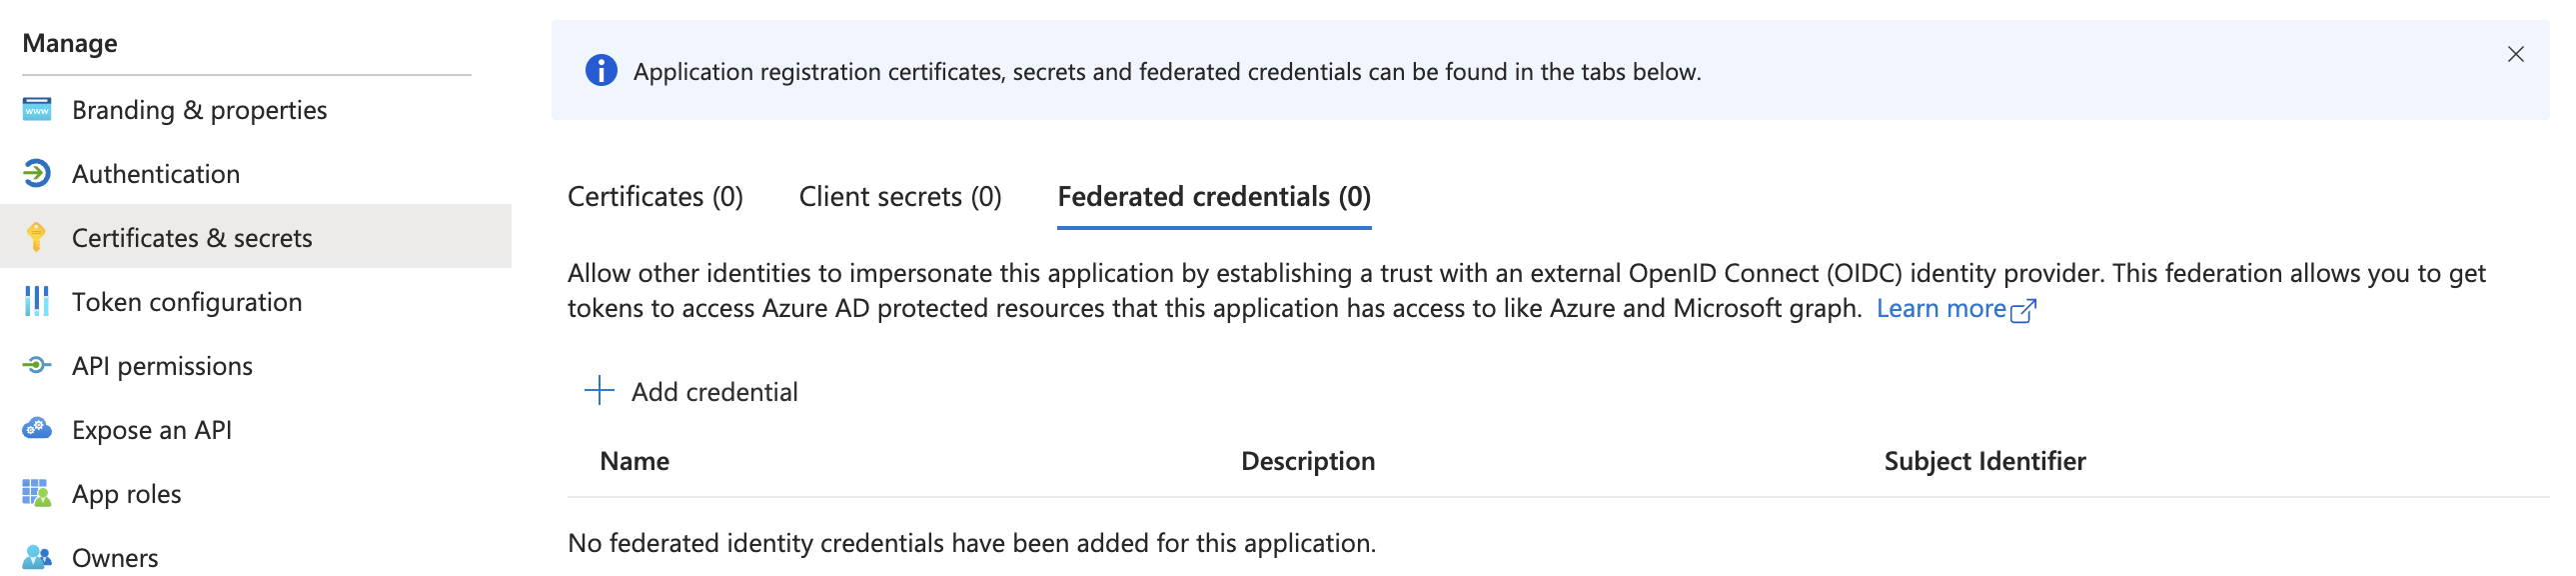 Certificates & secrets section of the Azure AD app